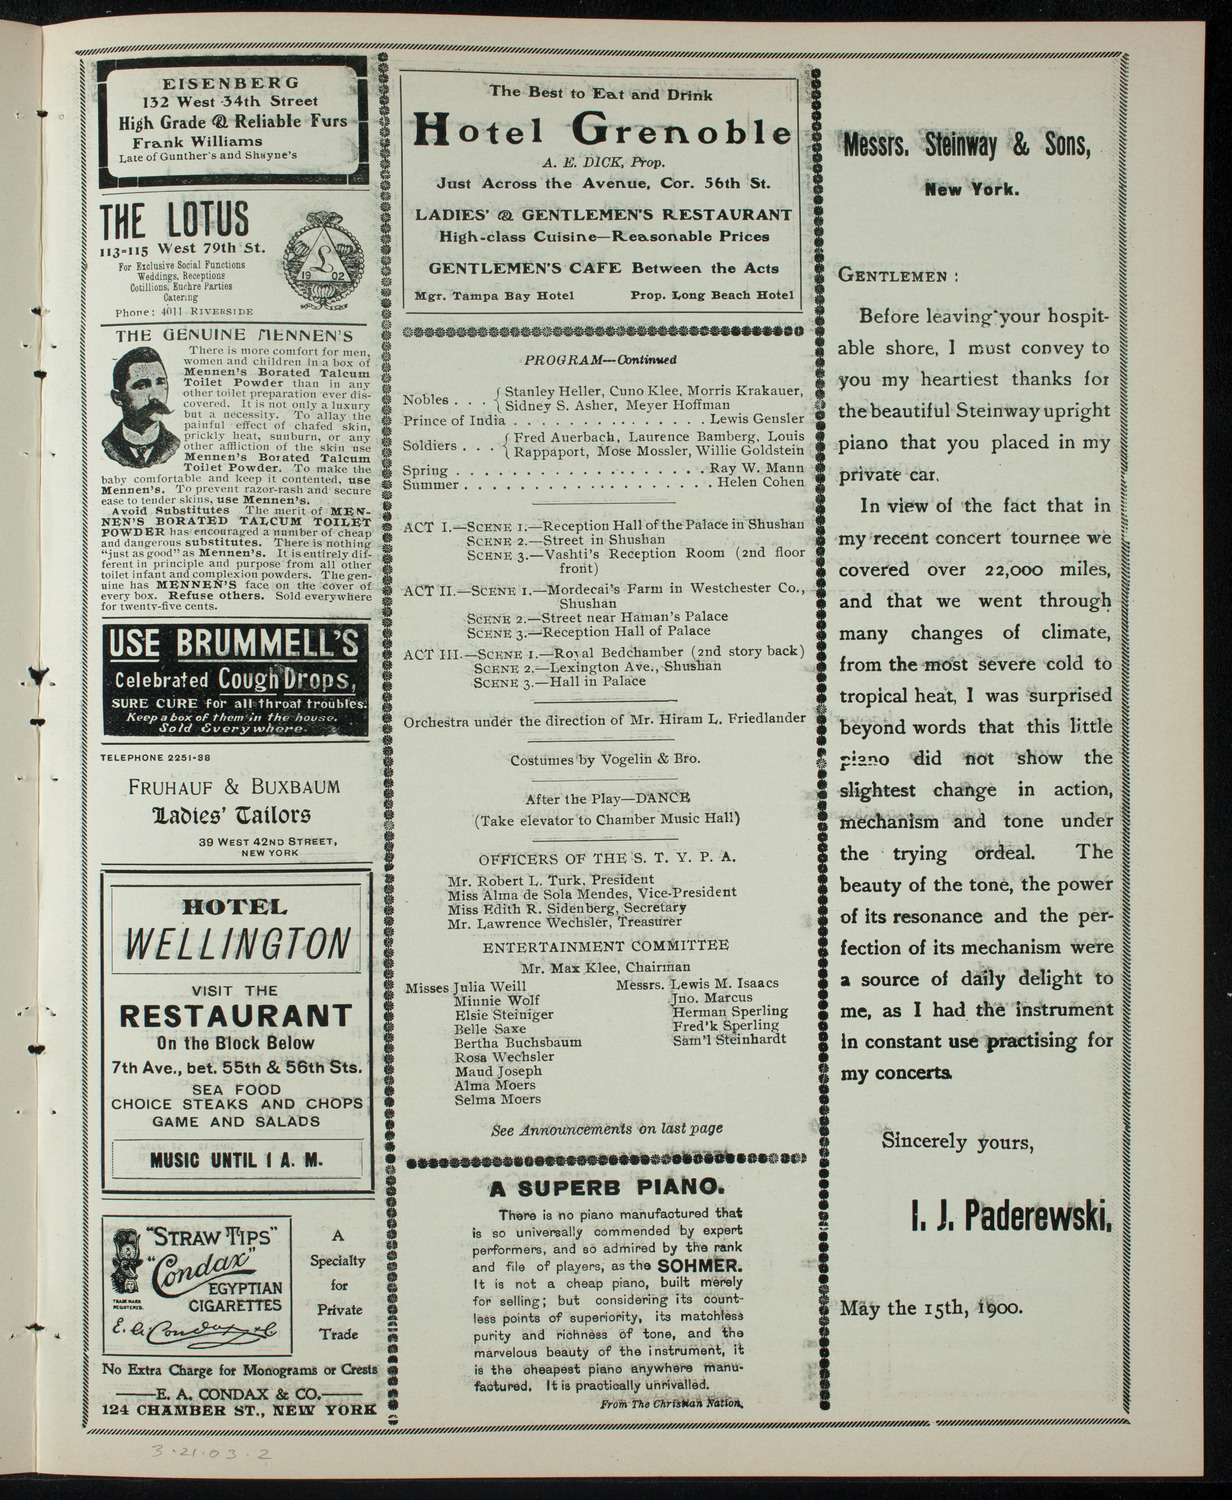 Shaaray Tefila Sunday School and Young People's Association Purim Entertainment, March 21, 1903, program page 3